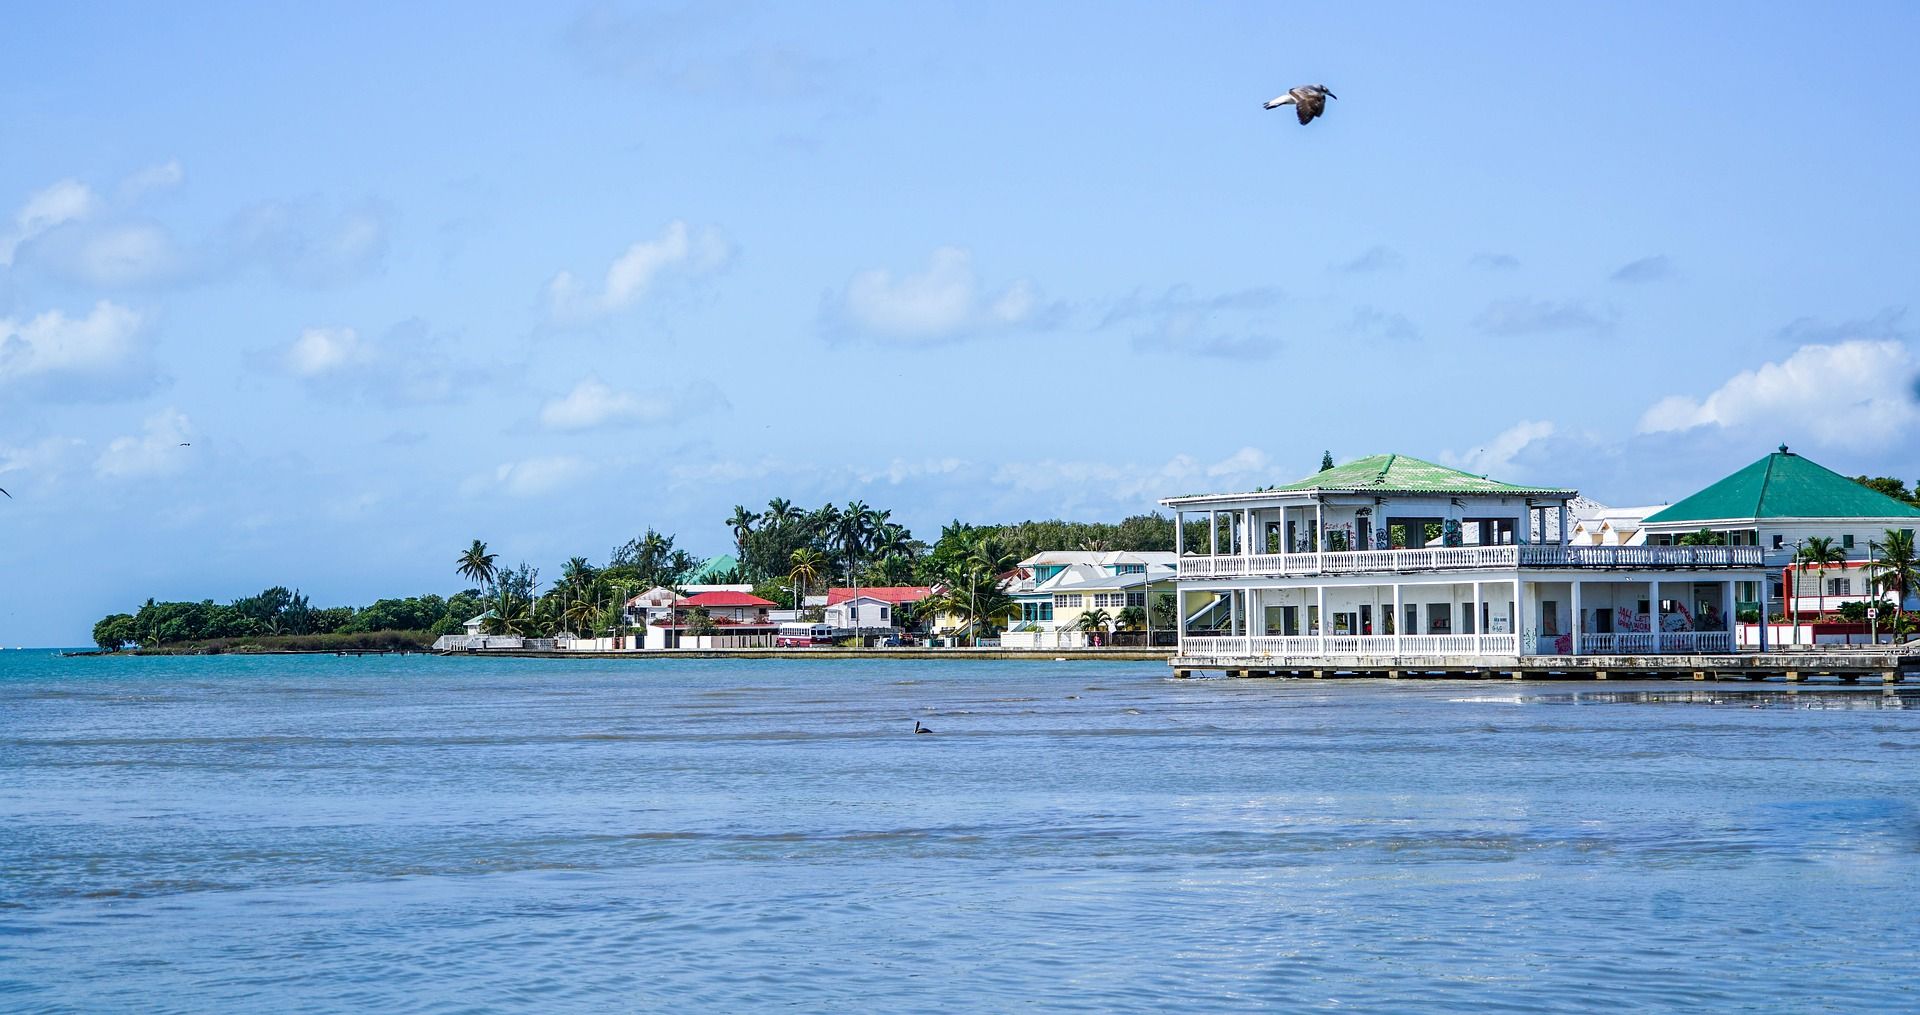 Buildings next to the sea in Belize City